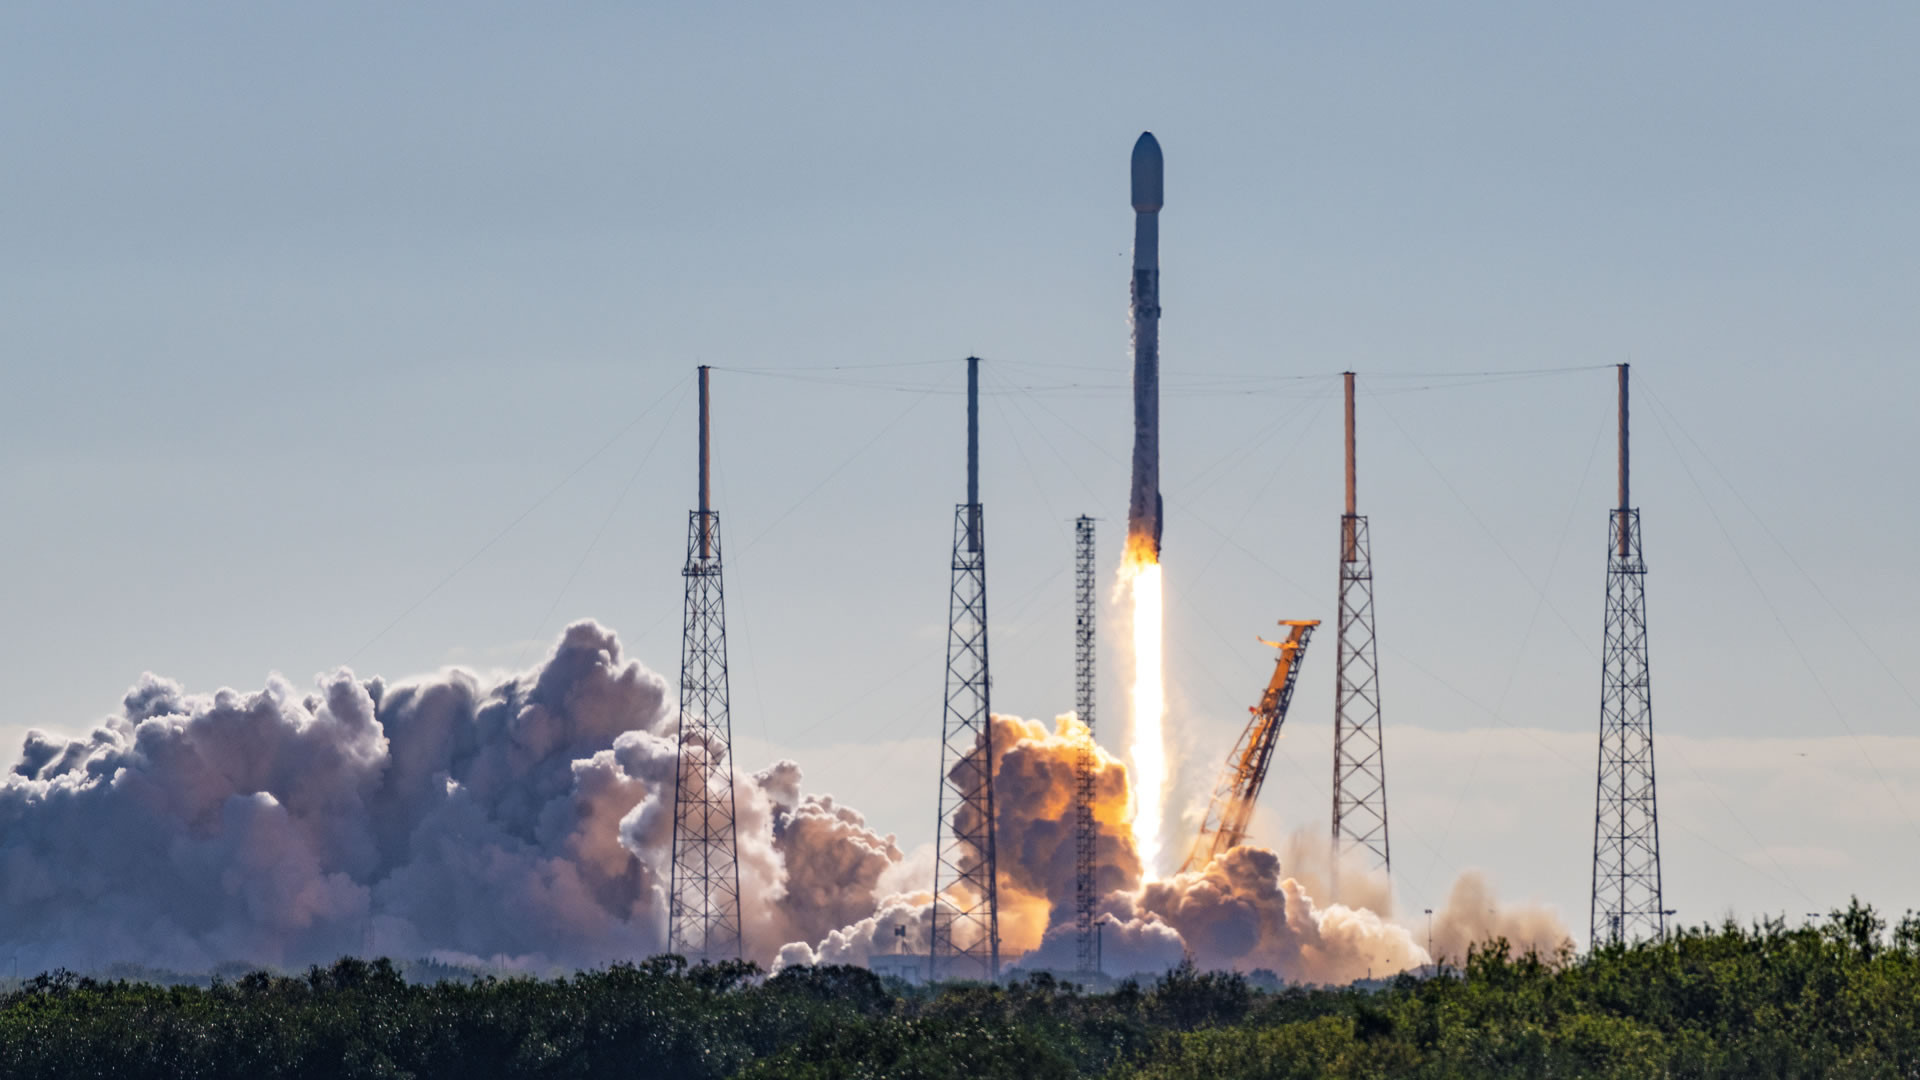 SpaceX, Led by Elon Musk, Is Building 100 US Government Surveillance Satellites